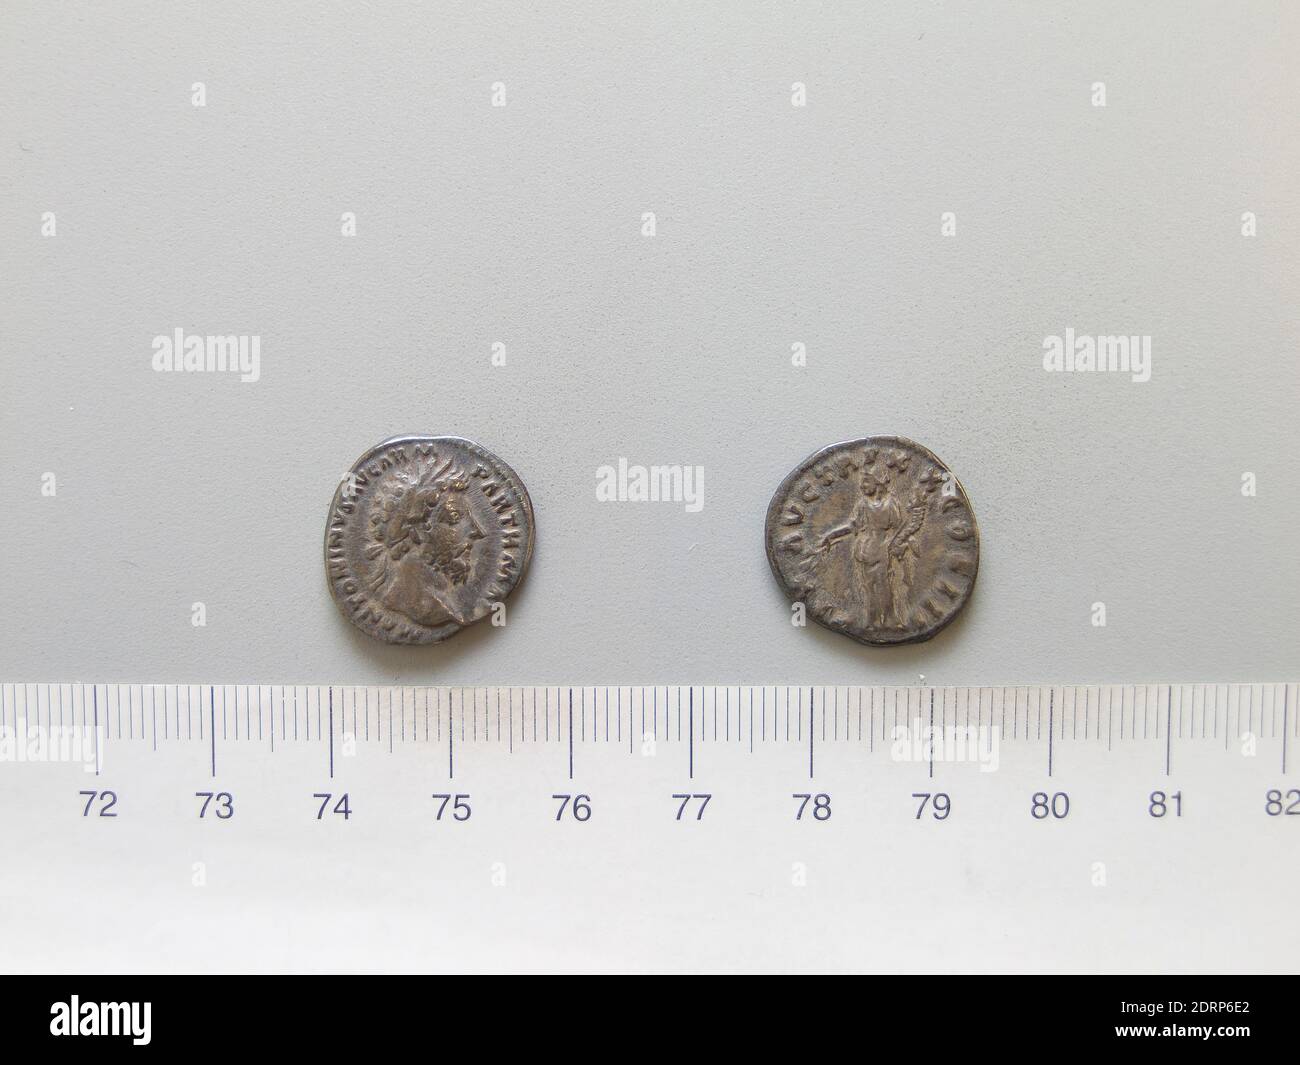 Ruler: Marcus Aurelius, Emperor of Rome, A.D. 121–180, ruled  A.D. 161–80, Mint: Rome, Denarius of Marcus Aurelius, Emperor of Rome from Rome, 165–66, Silver, 3.47 g, 6:00, 18.30 mm, Made in Rome, Italy, Roman, 2nd century, Numismatics Stock Photo